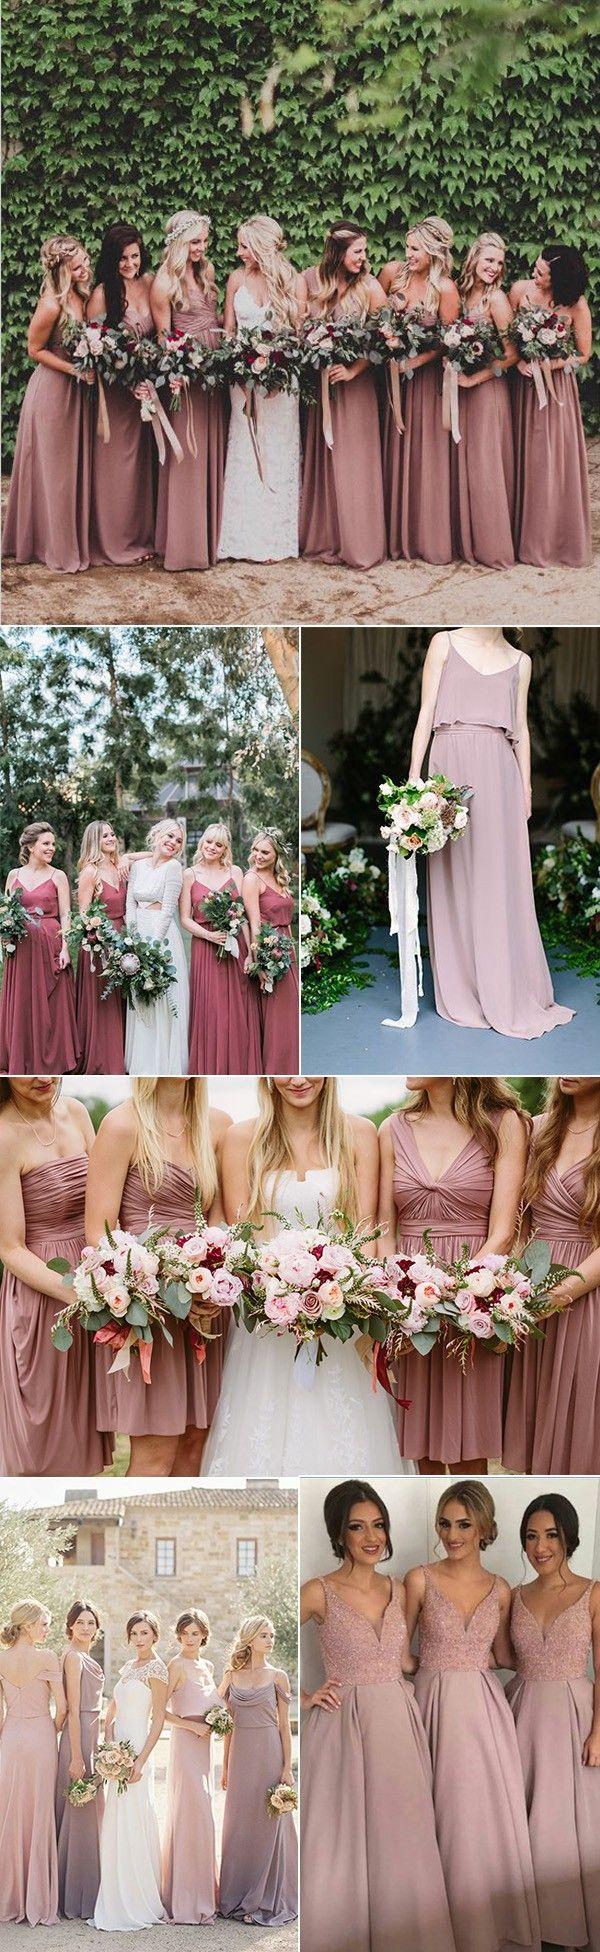 Wedding - Trending-24 Dusty Rose Wedding Color Ideas For 2017